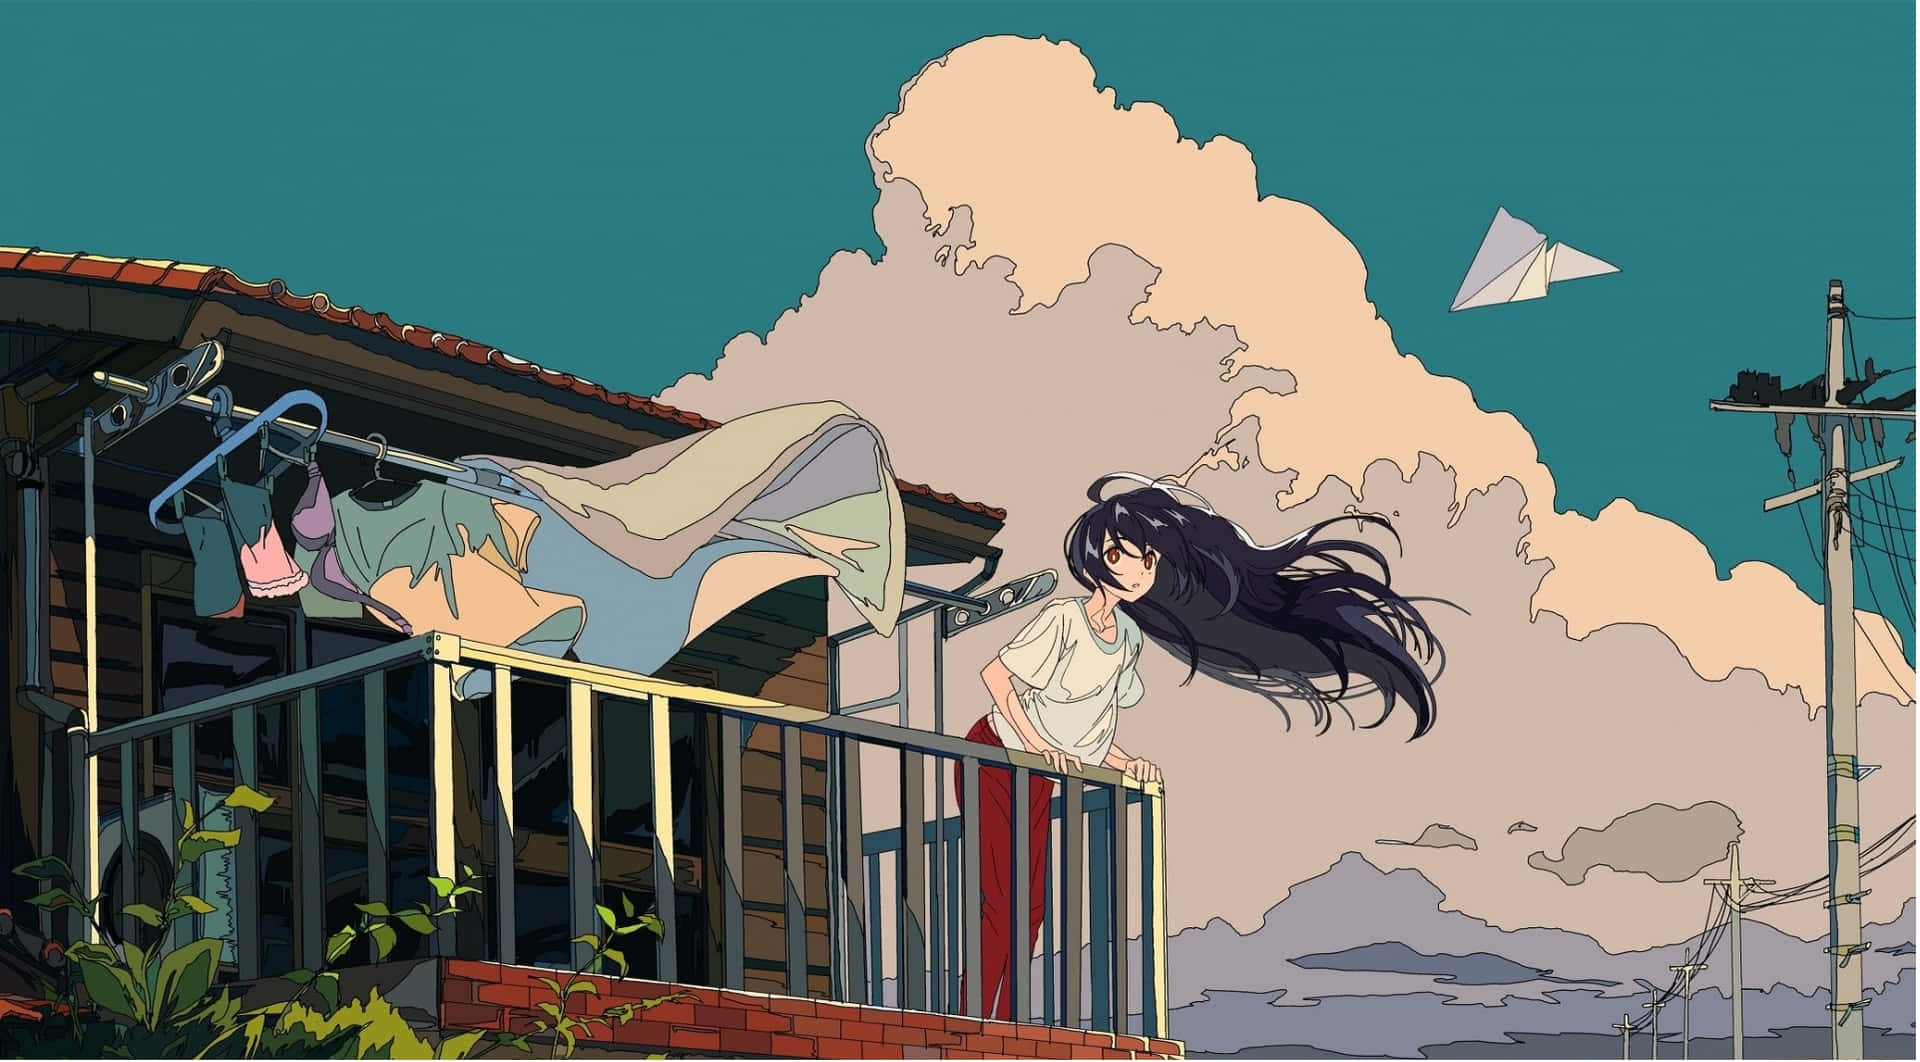 Anime Anime Girls Balcony Air Conditioning Sunset Piercing Skyline Original  Characters Brunette Dyed Wallpaper - Resolution:3088x2320 - ID:1207497 -  wallha.com